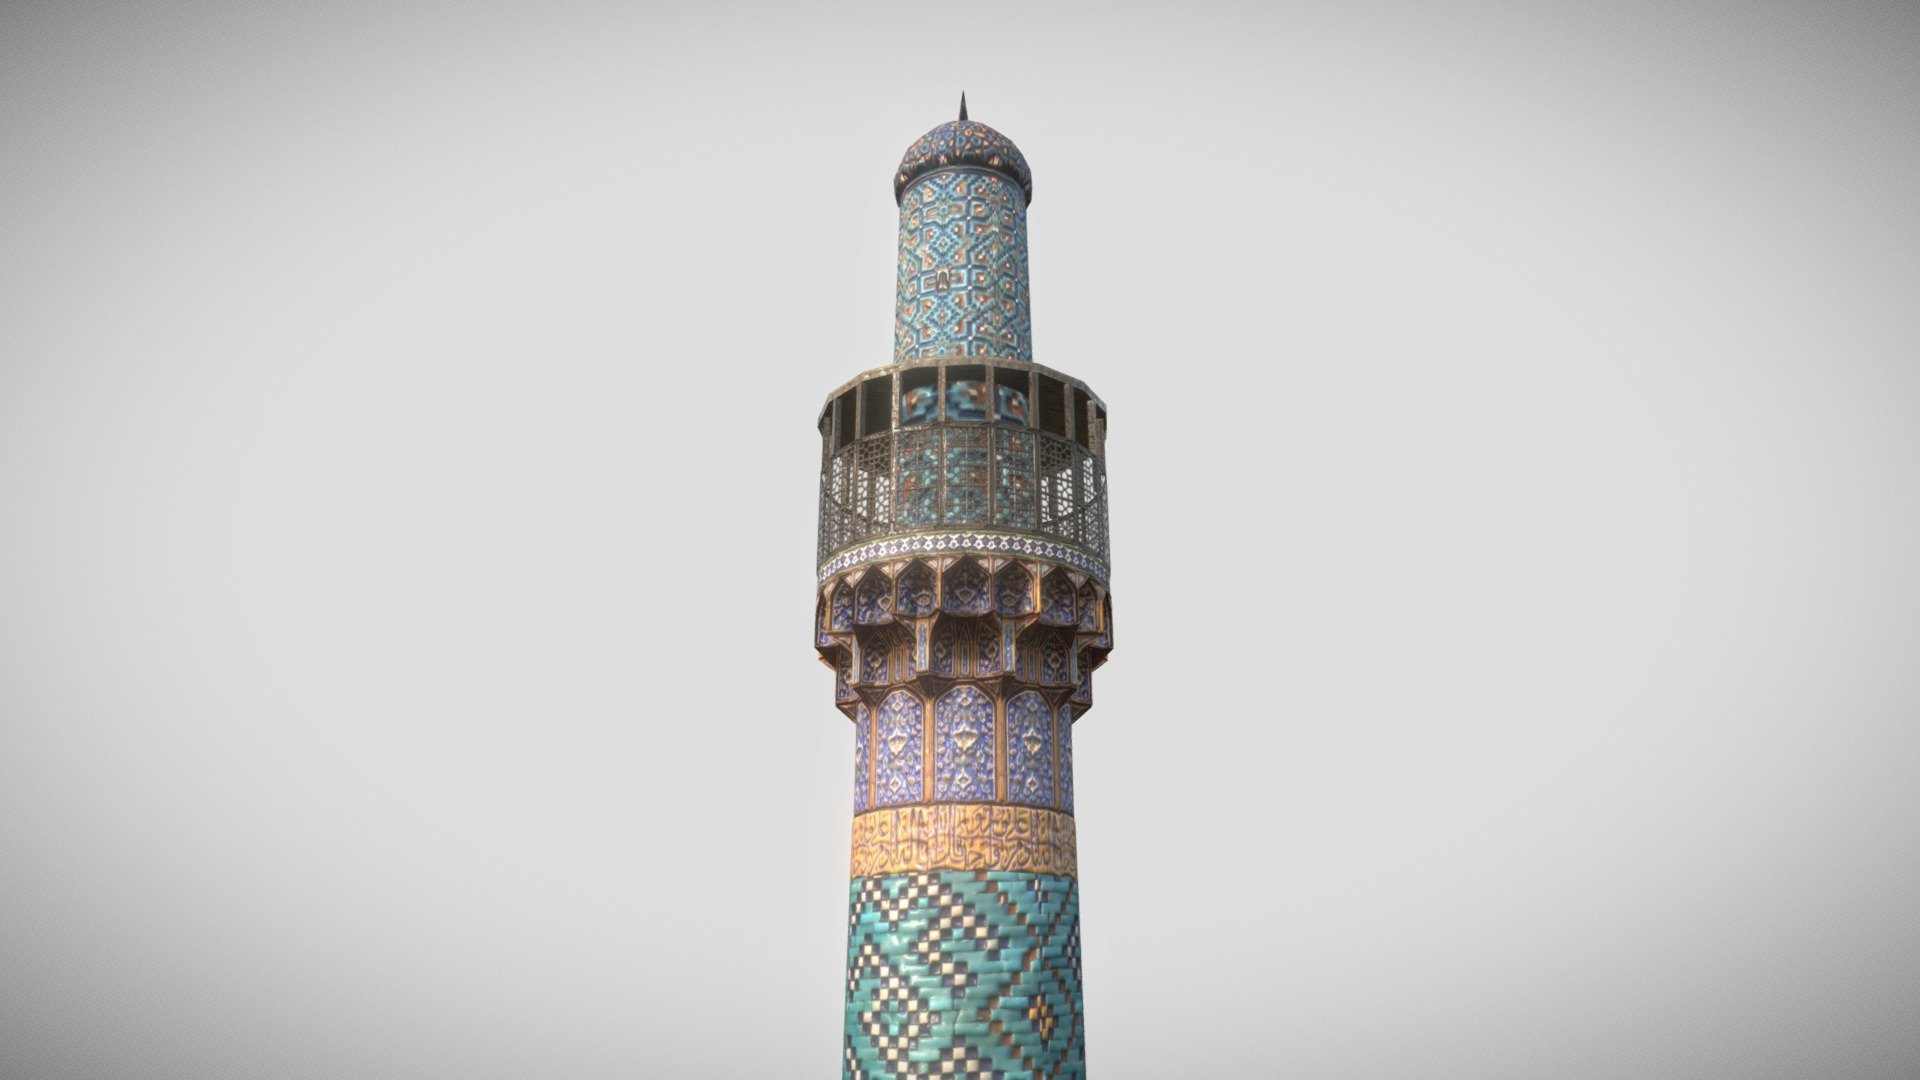 Low Poly Minaret 3D Model availabel for VR/AR projects (Persian: گل‌دسته‎ goldasteh, Azerbaijani: minarə, Turkish: minare,from Arabic: منارة‎ manarah) is a type of tower typically built into or adjacent to mosques. Minarets serve multiple purposes. While they provide a visual focal point, they are generally used for the Muslim call to prayer (adhan). The basic form of a minaret includes a base, shaft, a cap and head.They are generally a tall spire with a conical or onion-shaped crown 3d model